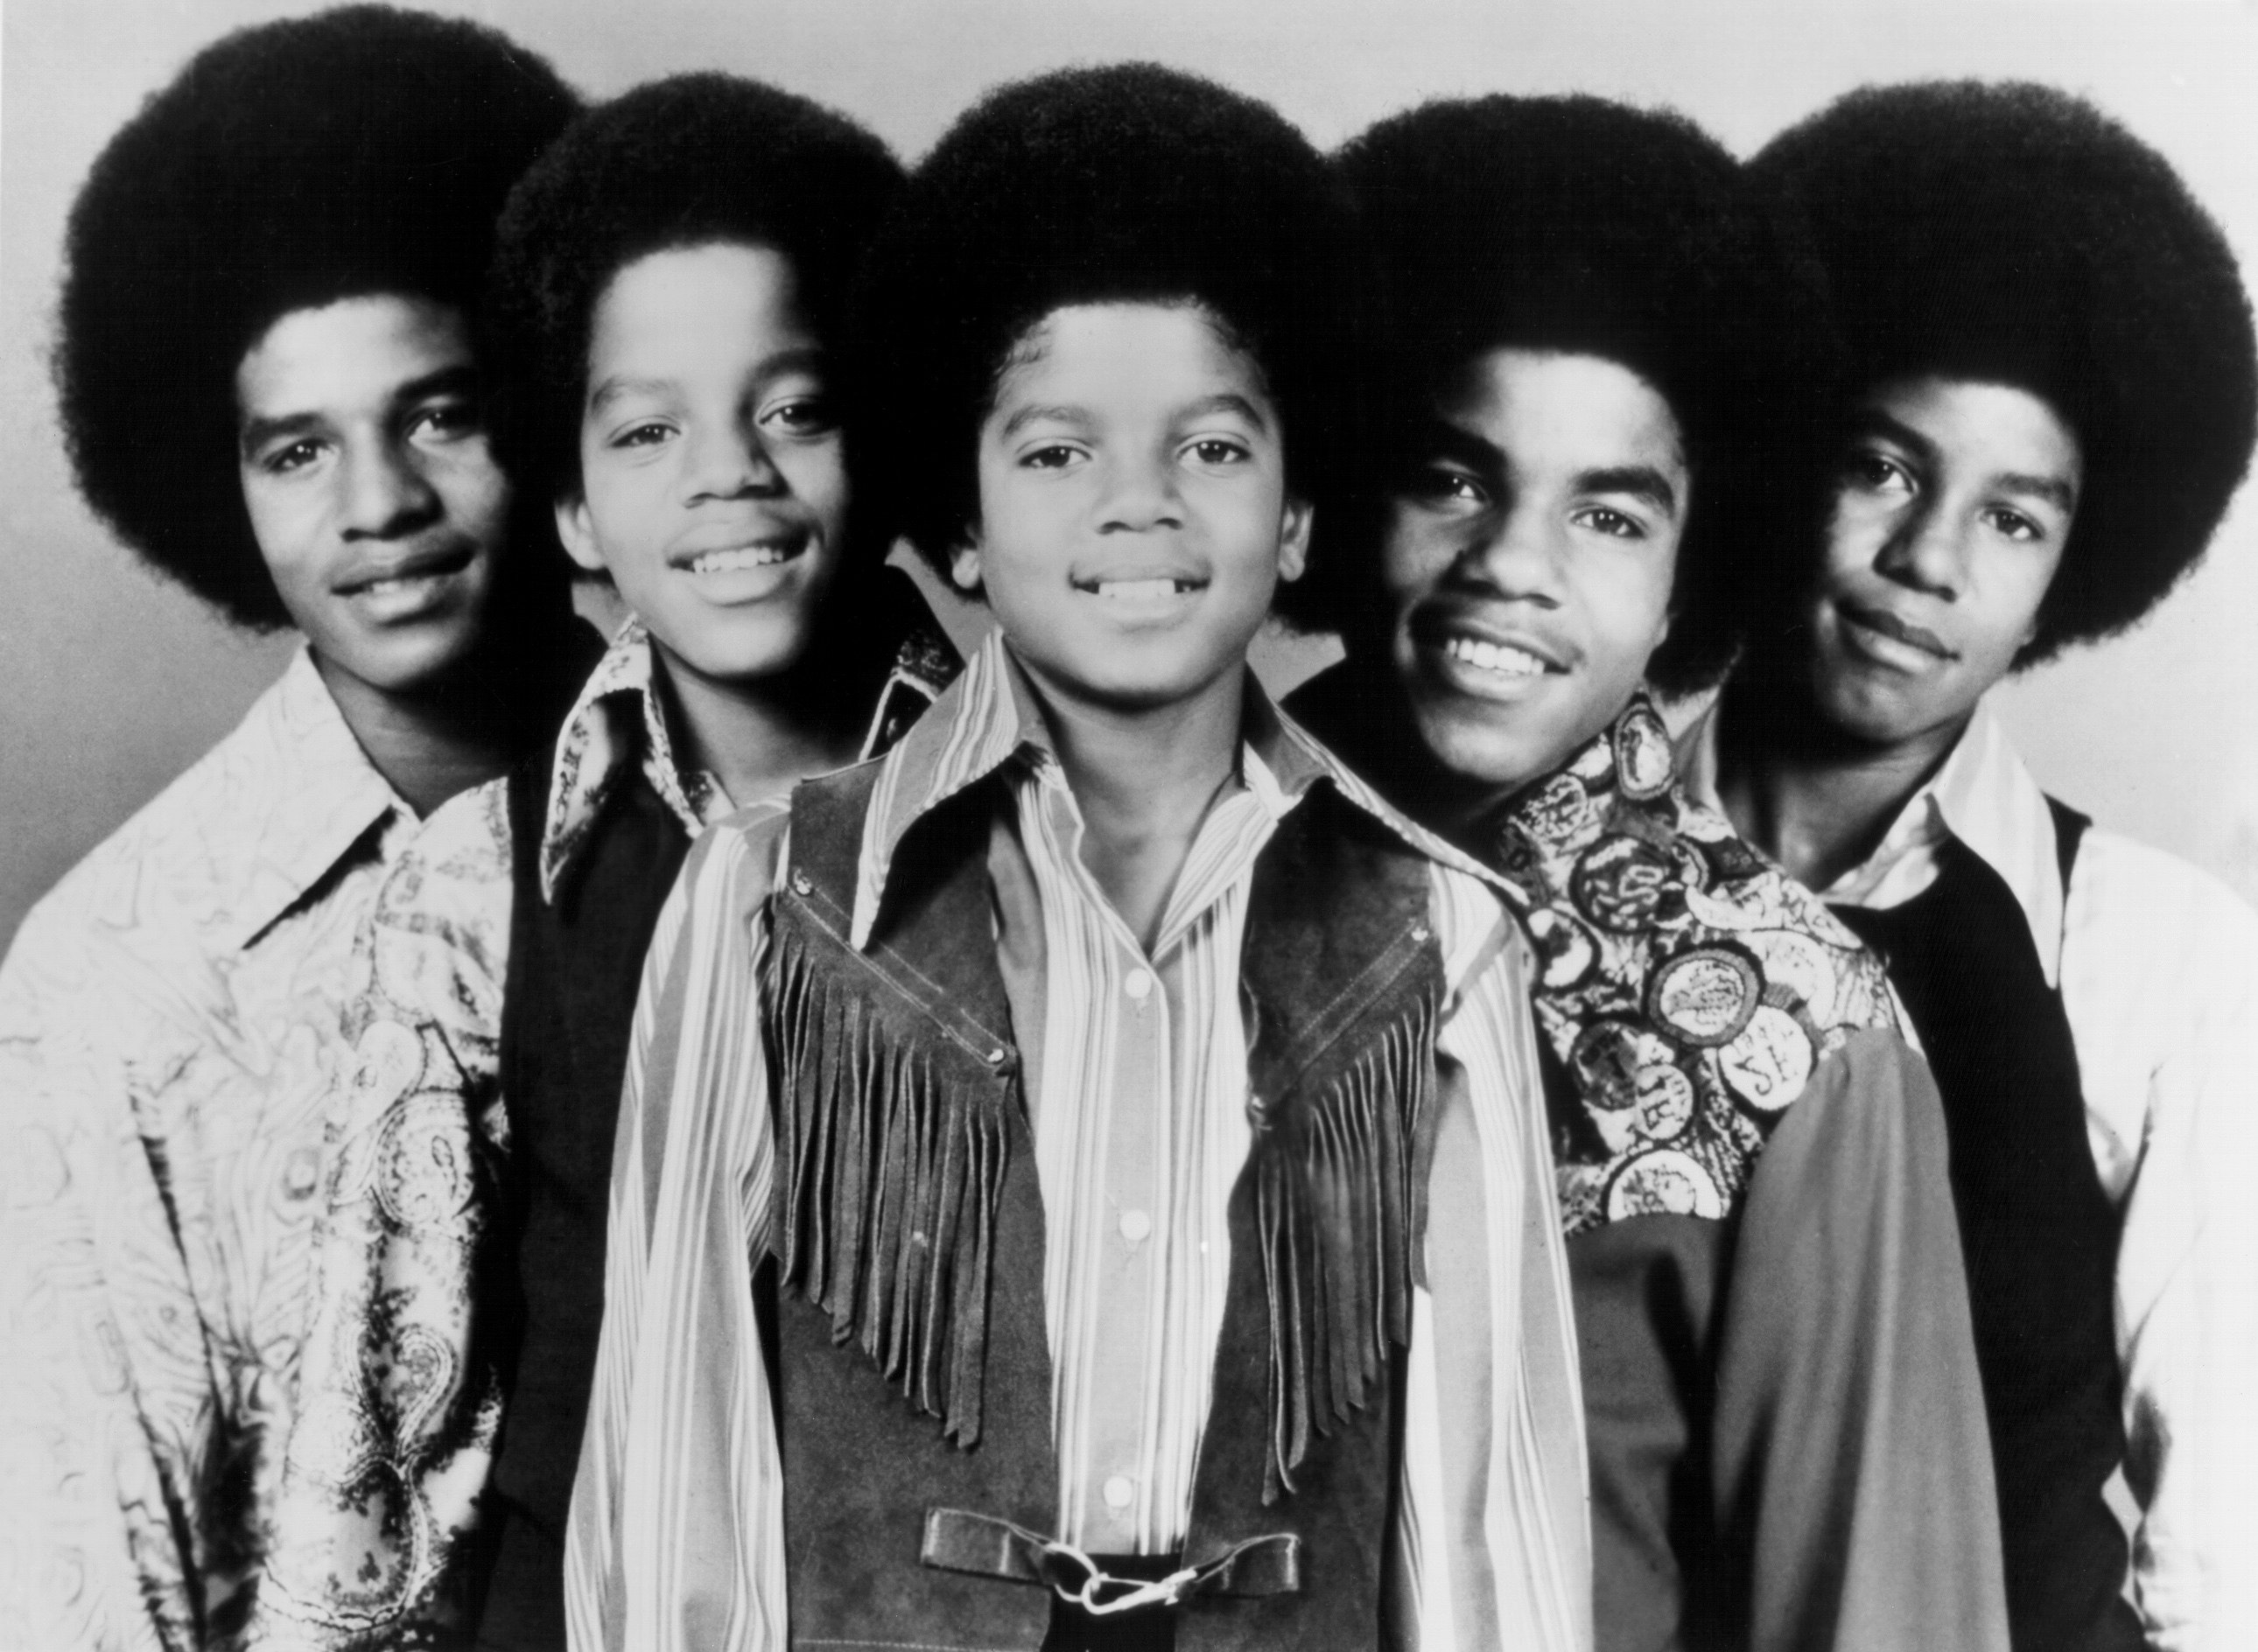 The Jackson 5 with afros